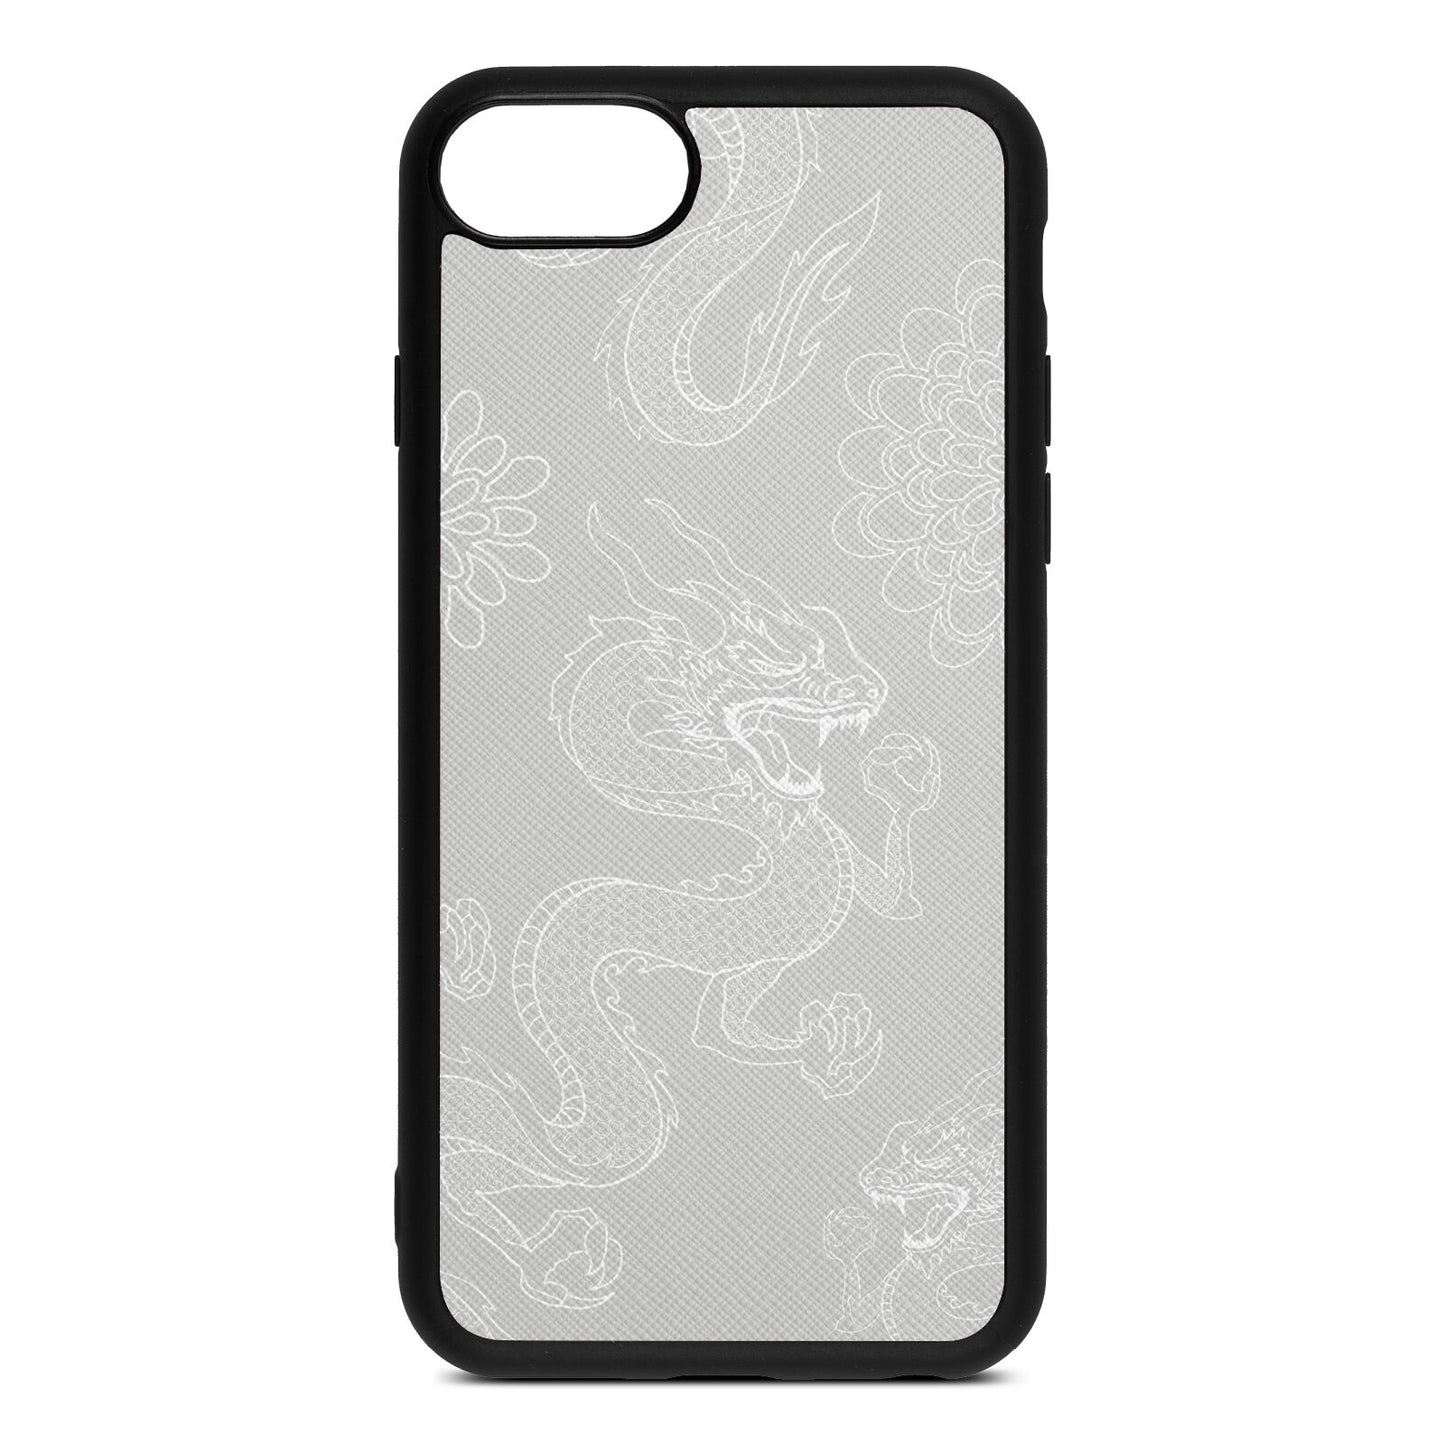 Dragons Silver Saffiano Leather iPhone 8 Case